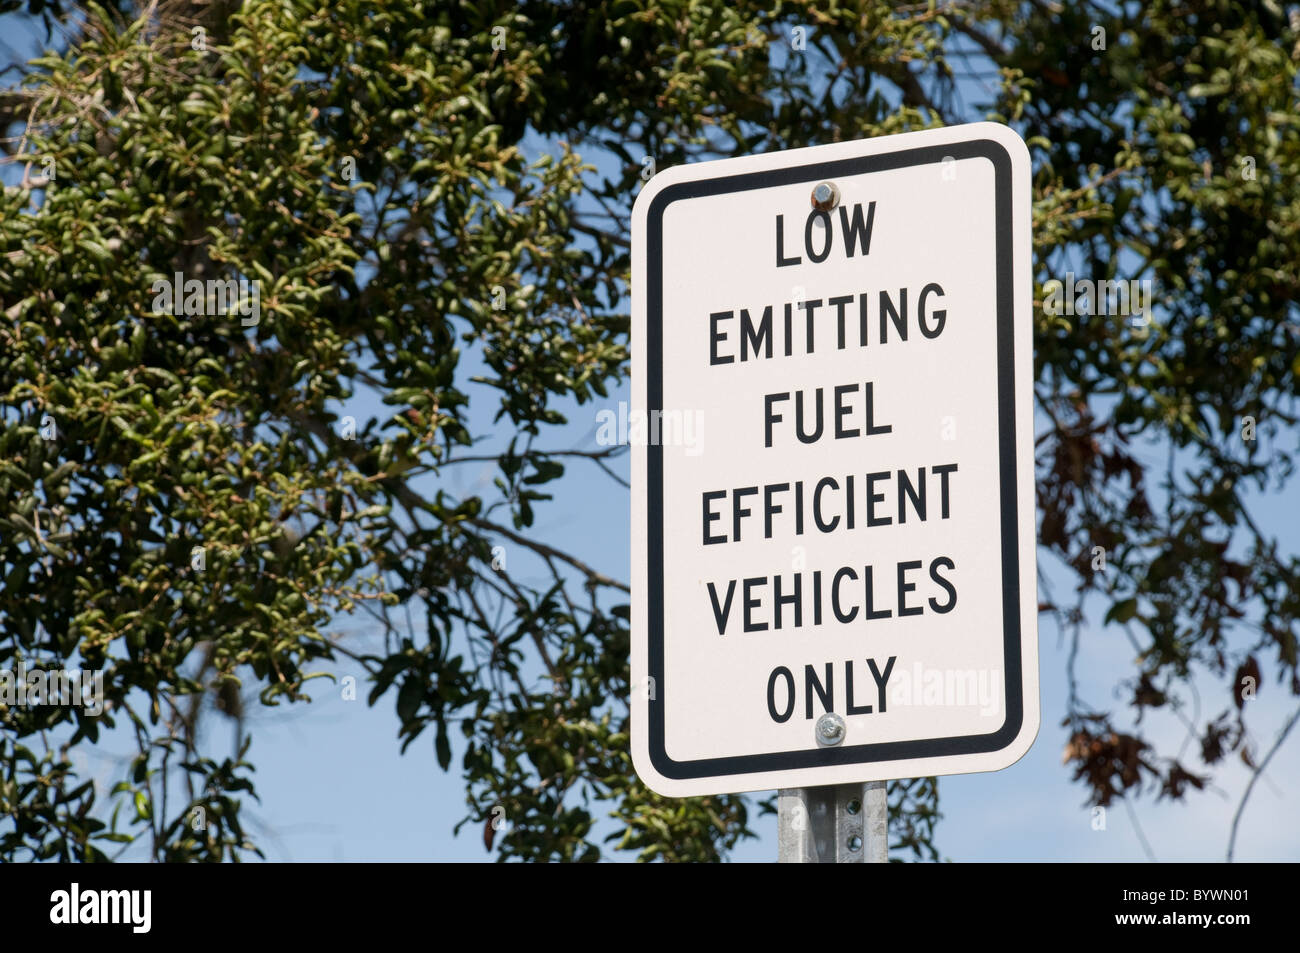 Low Emitting Fuel Efficient Vehicles Only Sign in Parking Lot Stock Photo